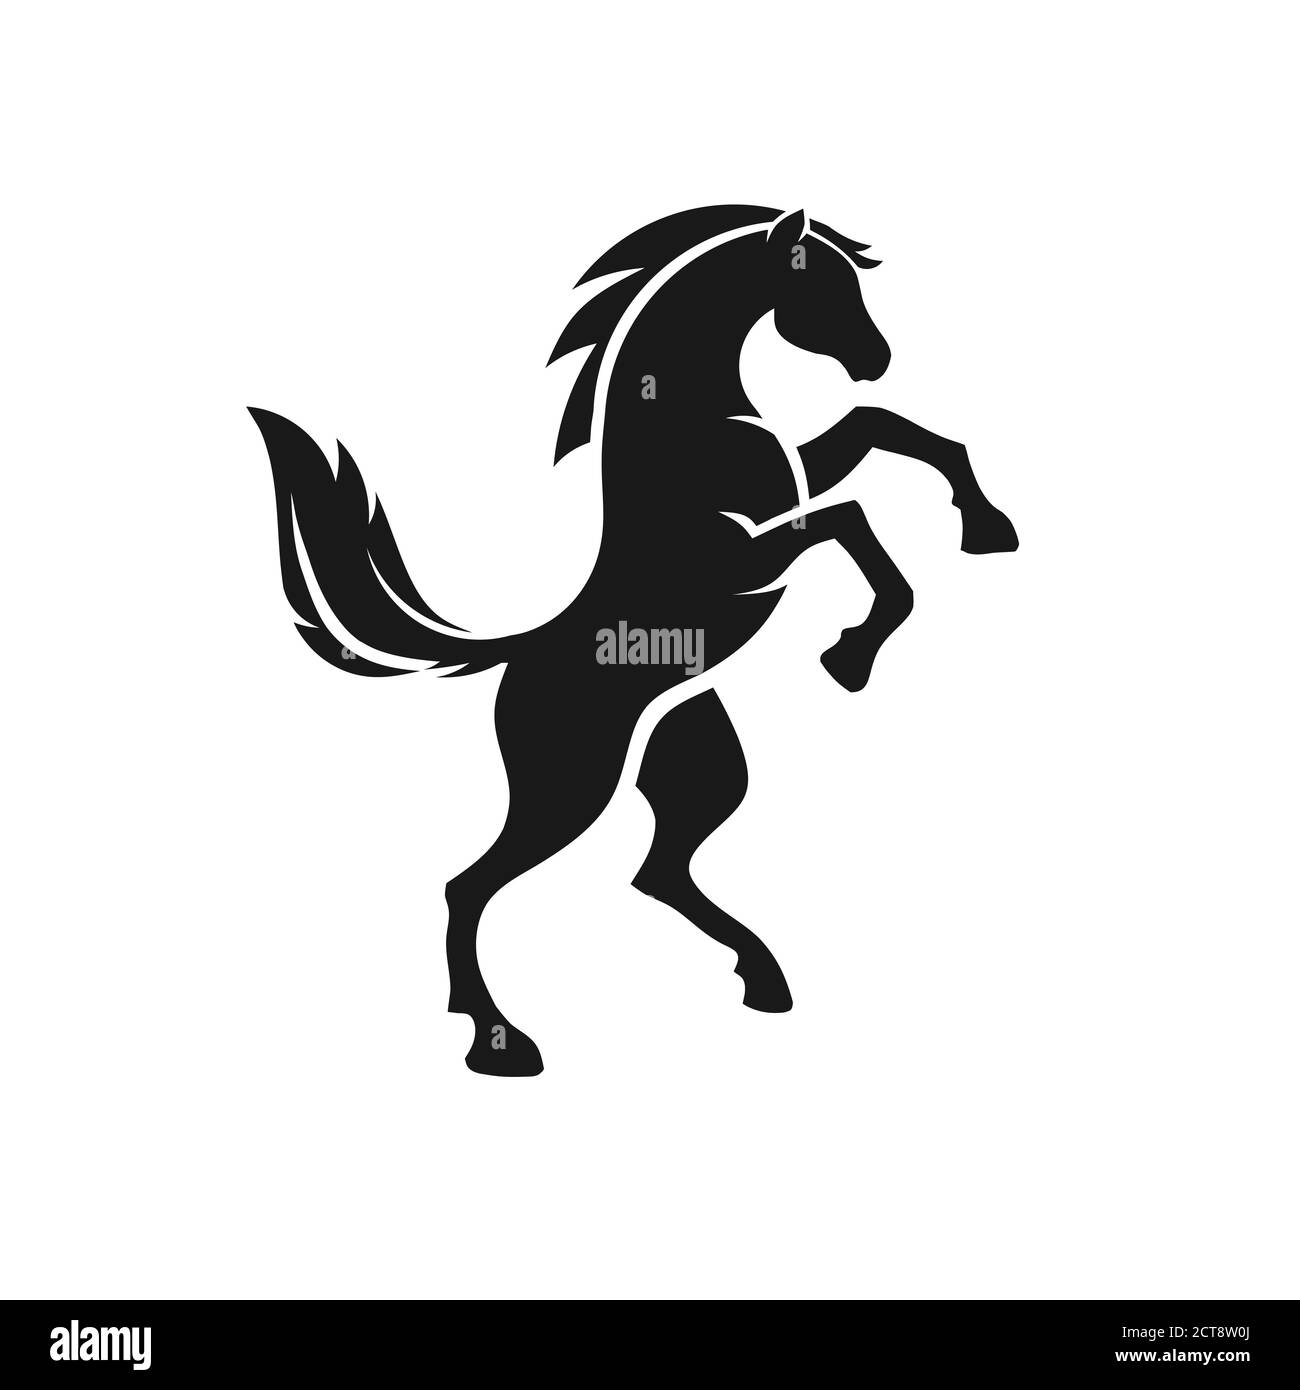 standing horse side view black vector silhouette design Stock Vector